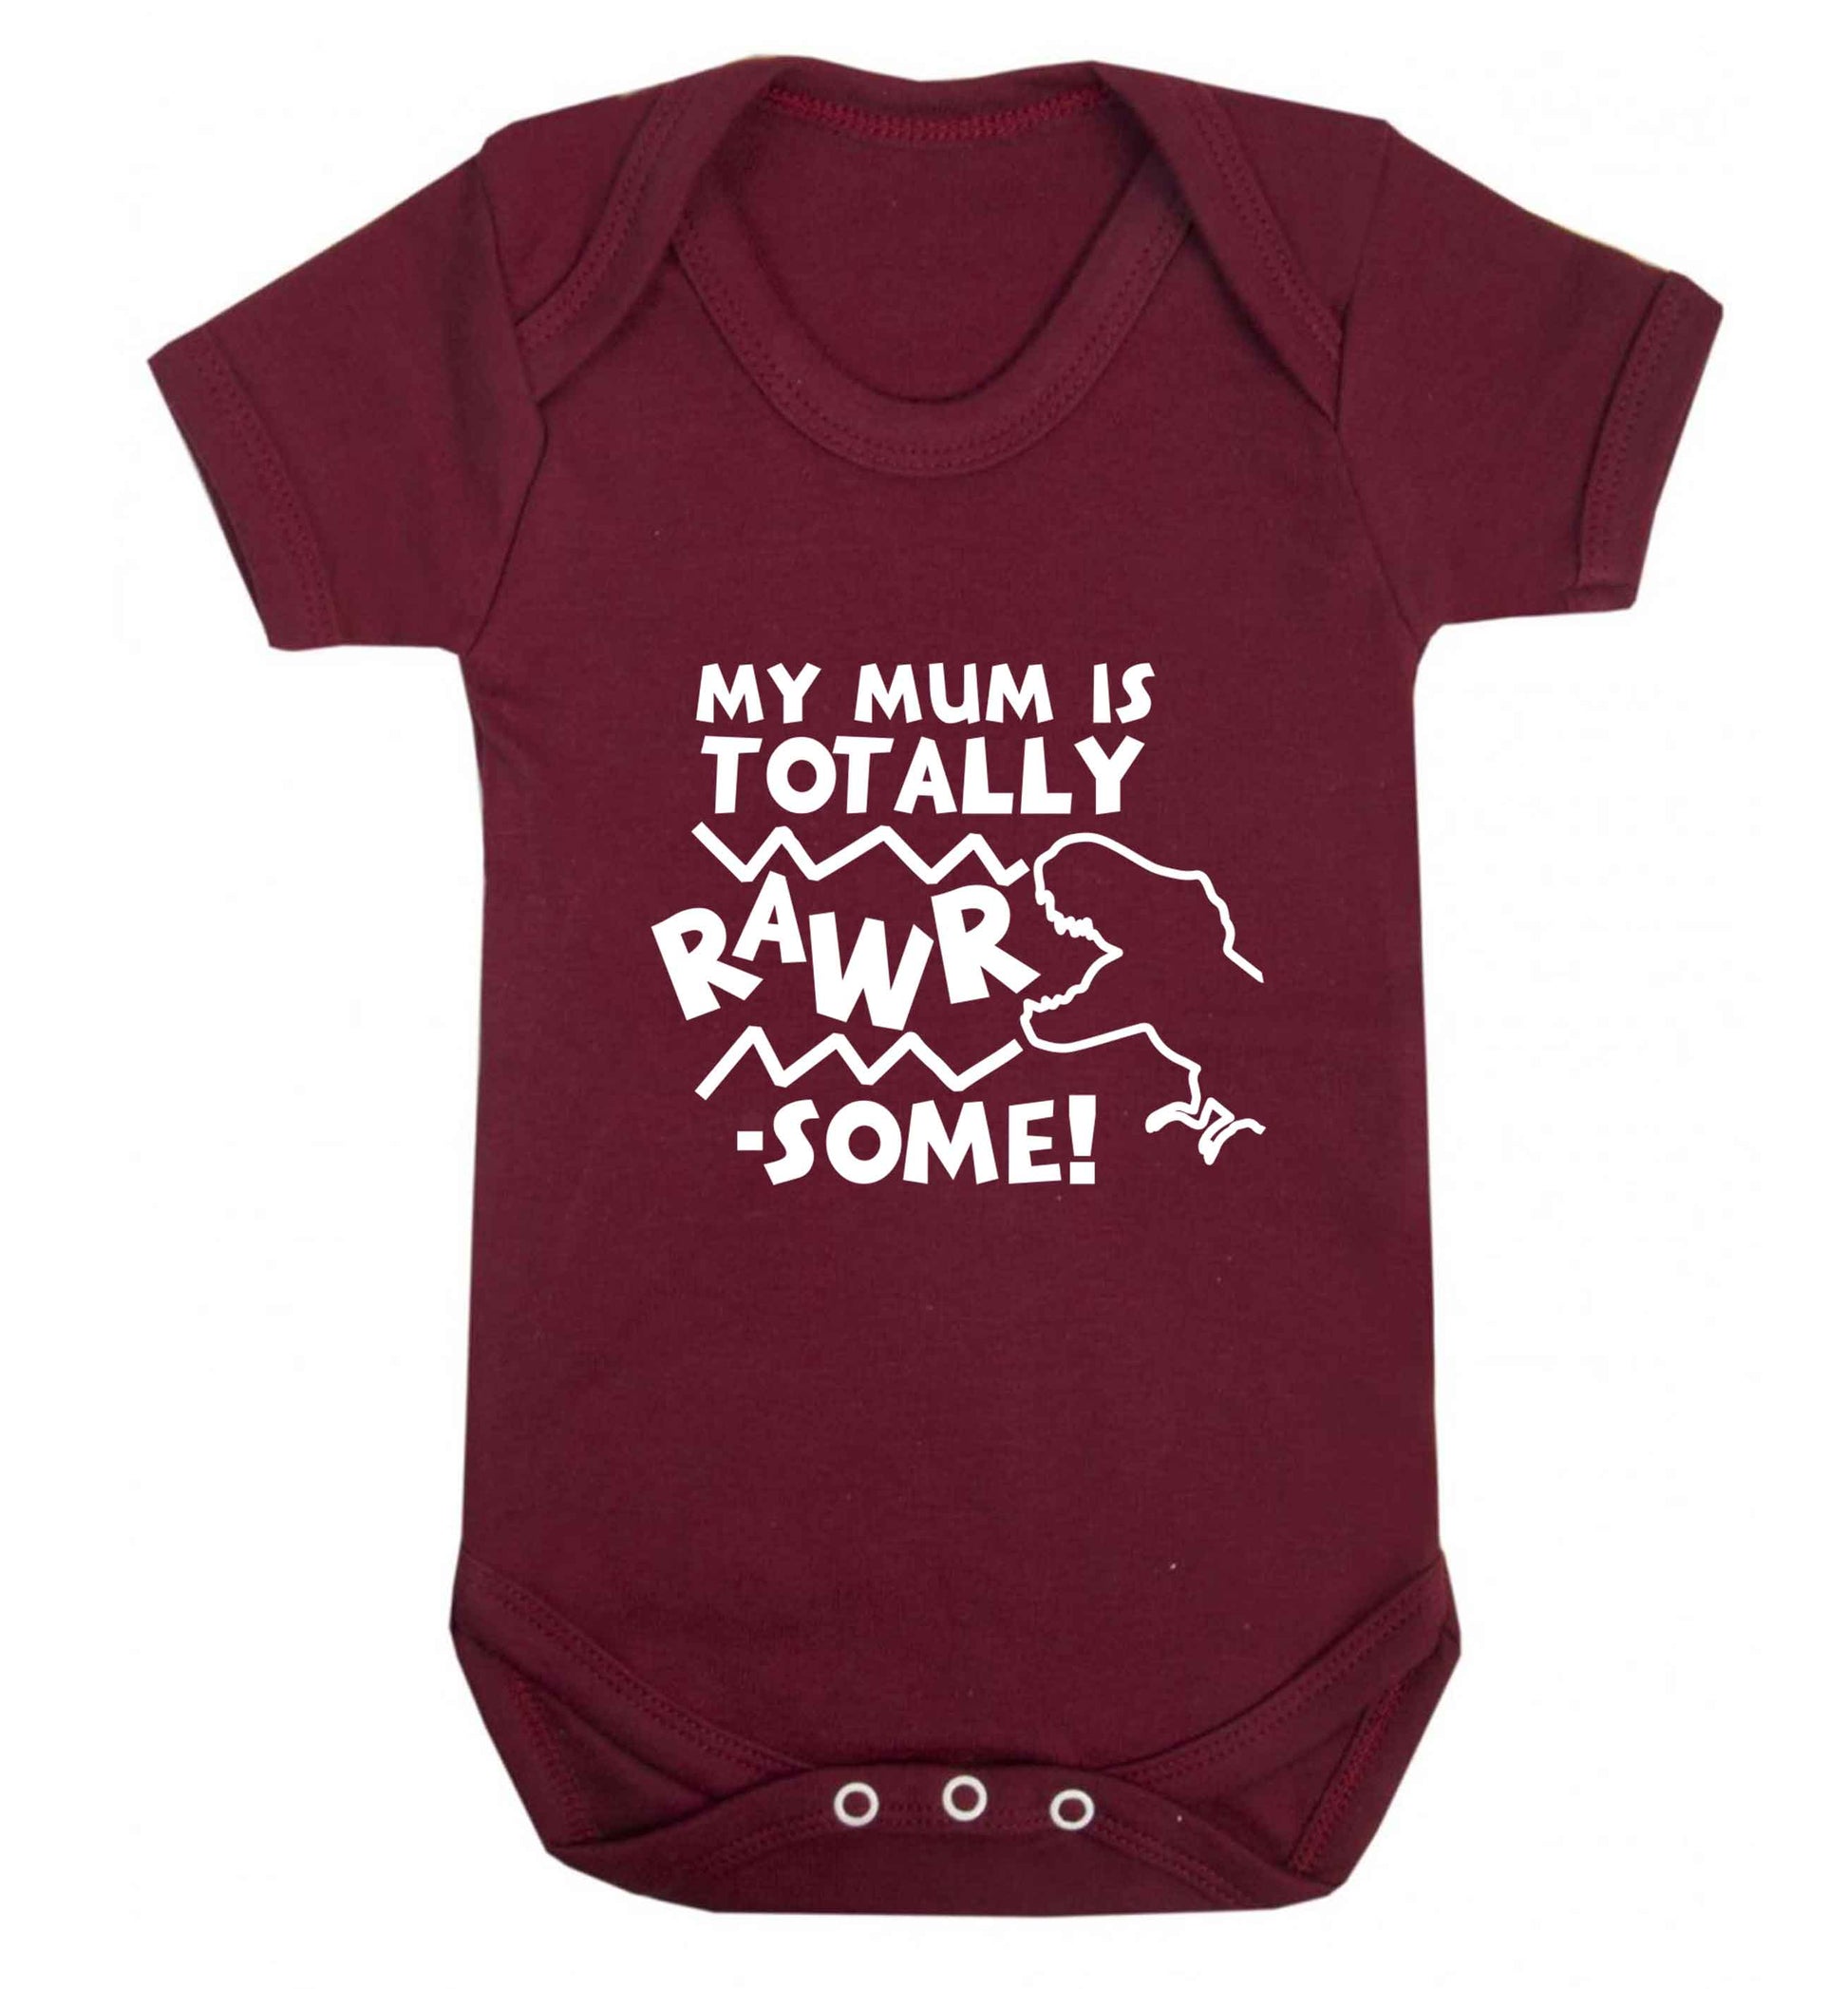 My mum is totally rawrsome baby vest maroon 18-24 months